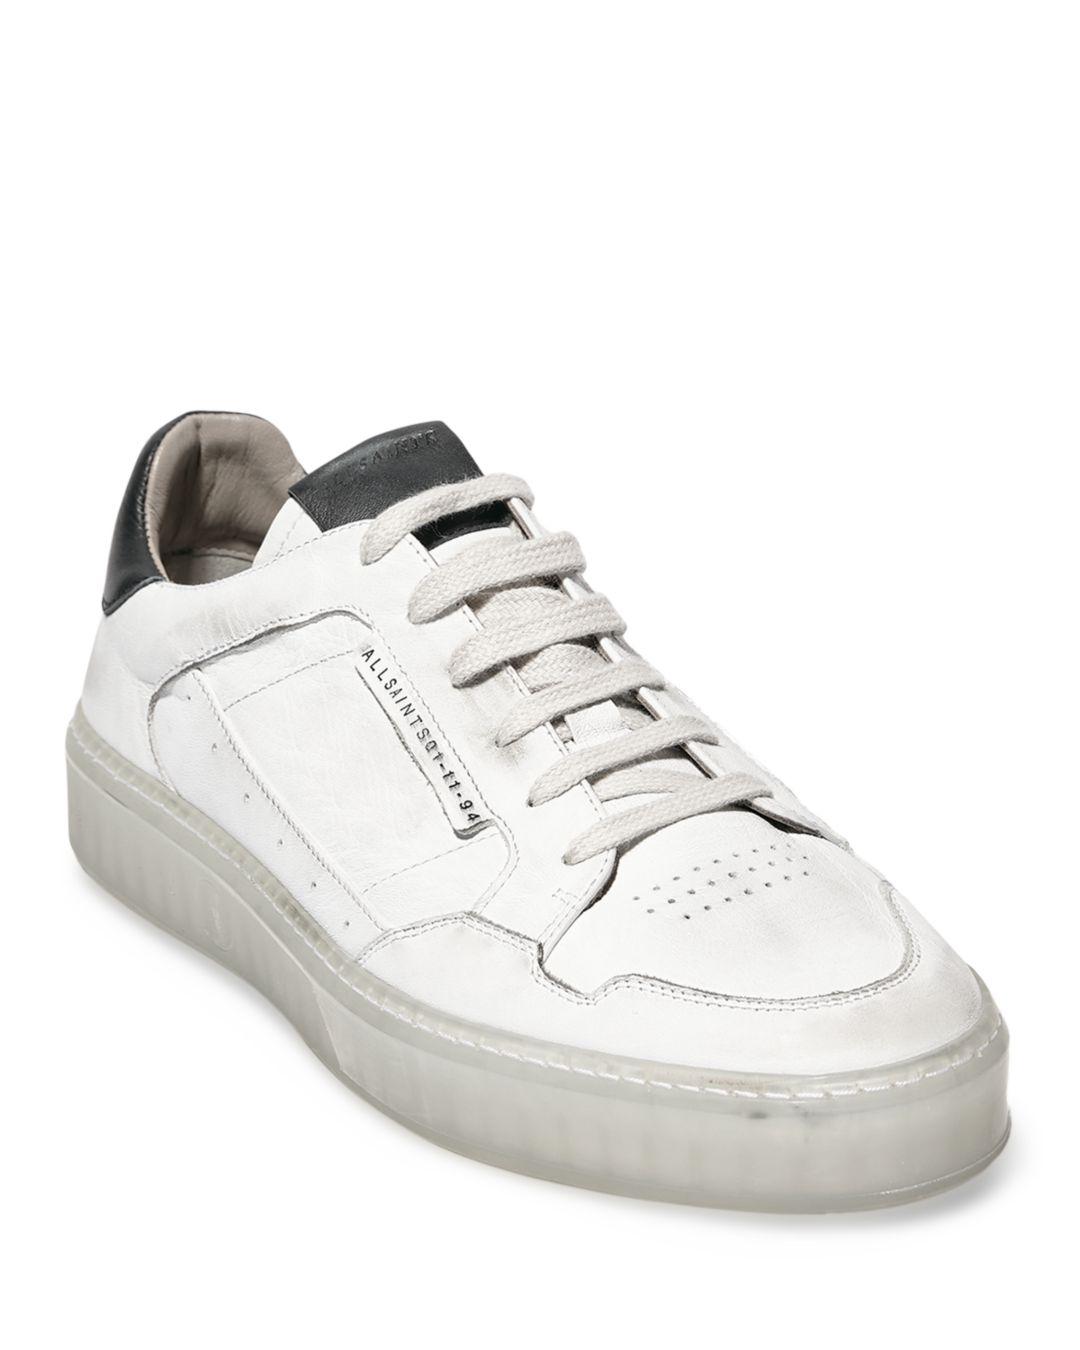 AllSaints Alton Lace Up Sneakers in White for Men | Lyst